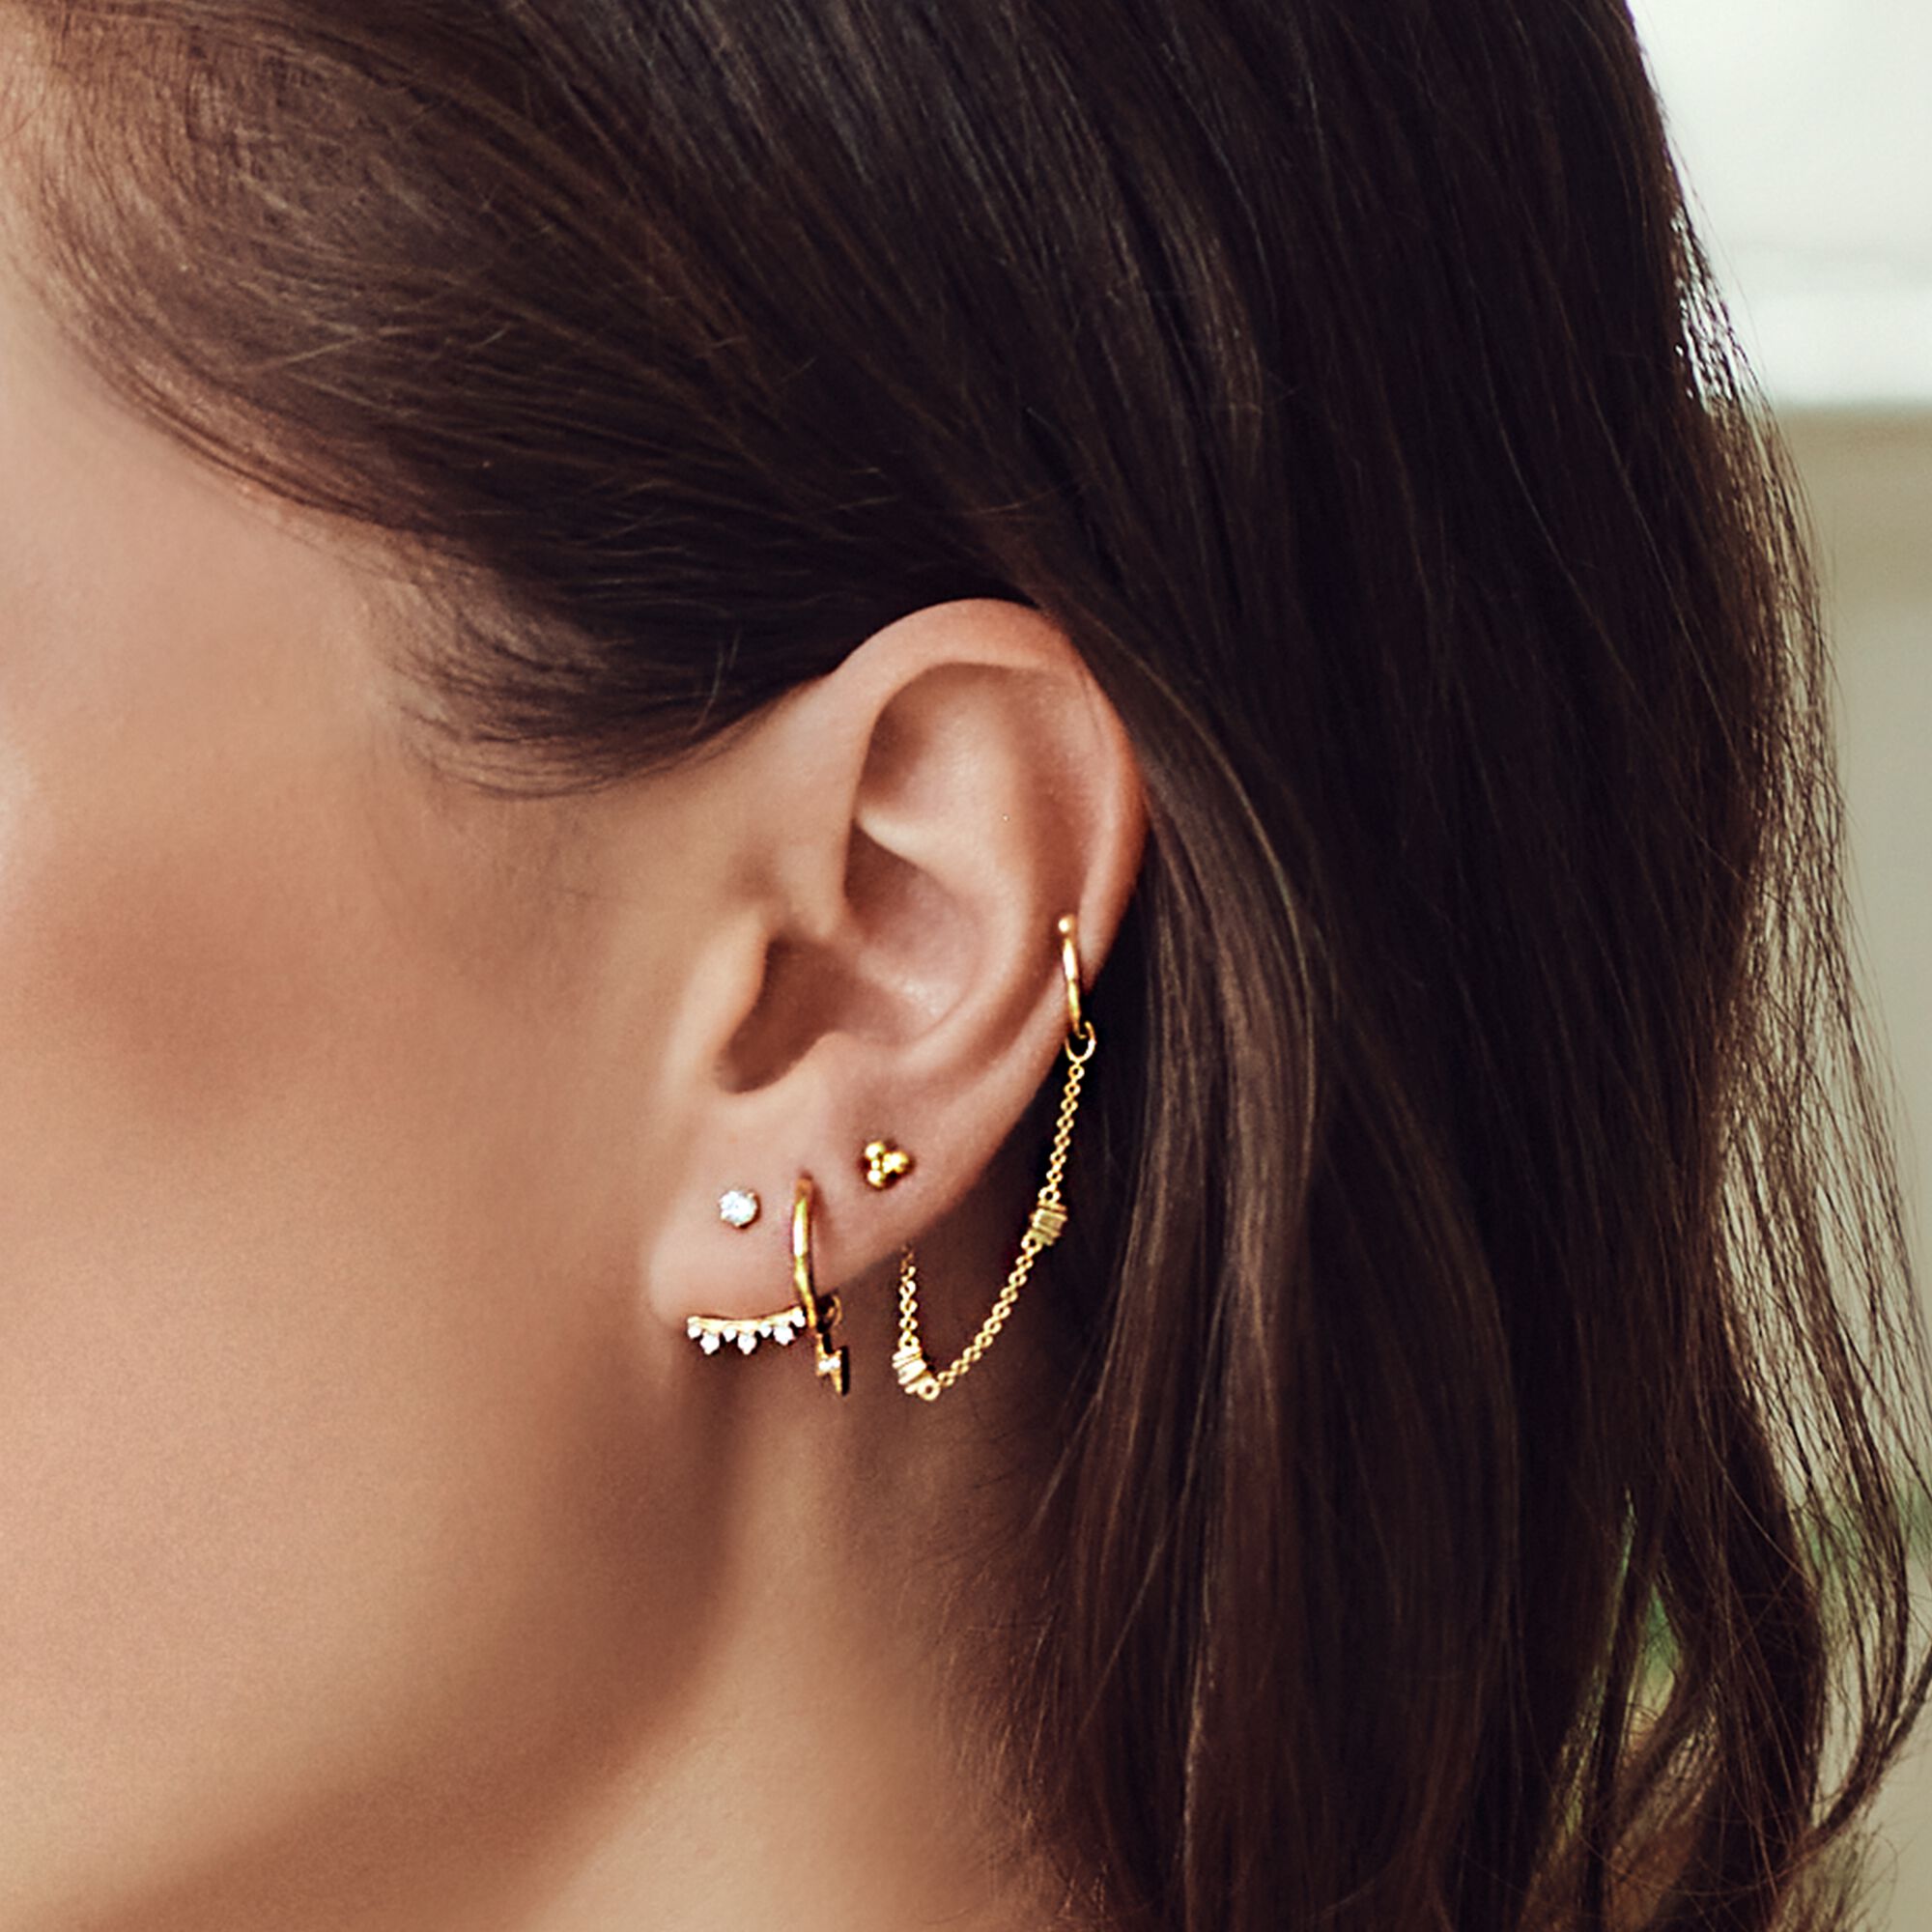 Ear stud in gold: Small SABO THOMAS │ bubbles geometrical